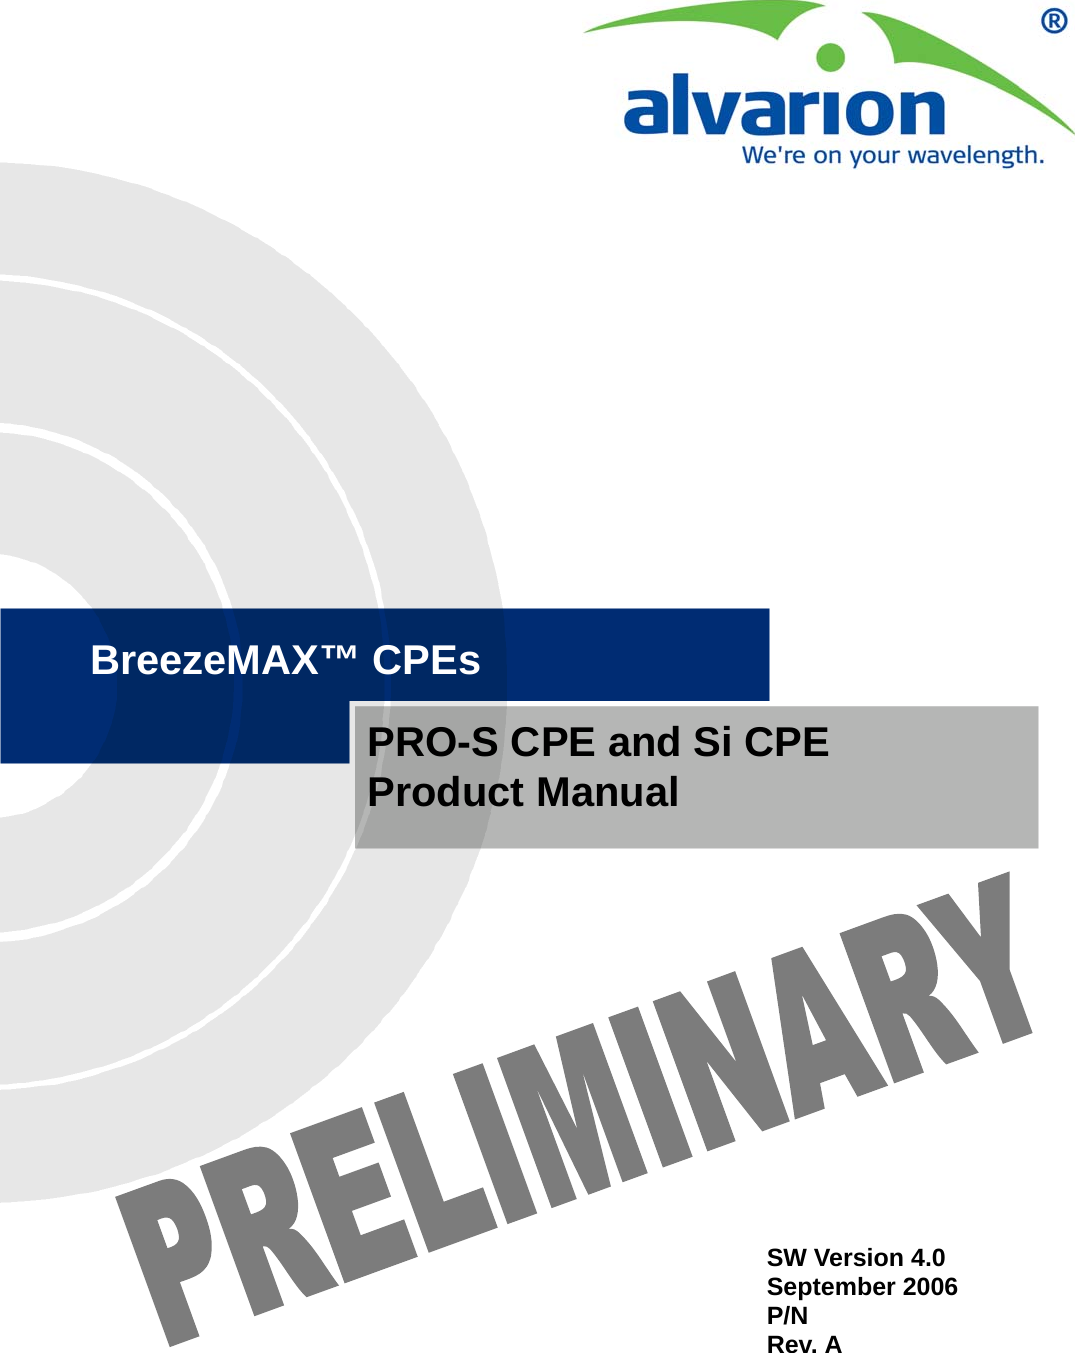 BreezeMAX™ CPEsPRO-S CPE and Si CPEProduct ManualSW Version 4.0September 2006P/N Rev. A